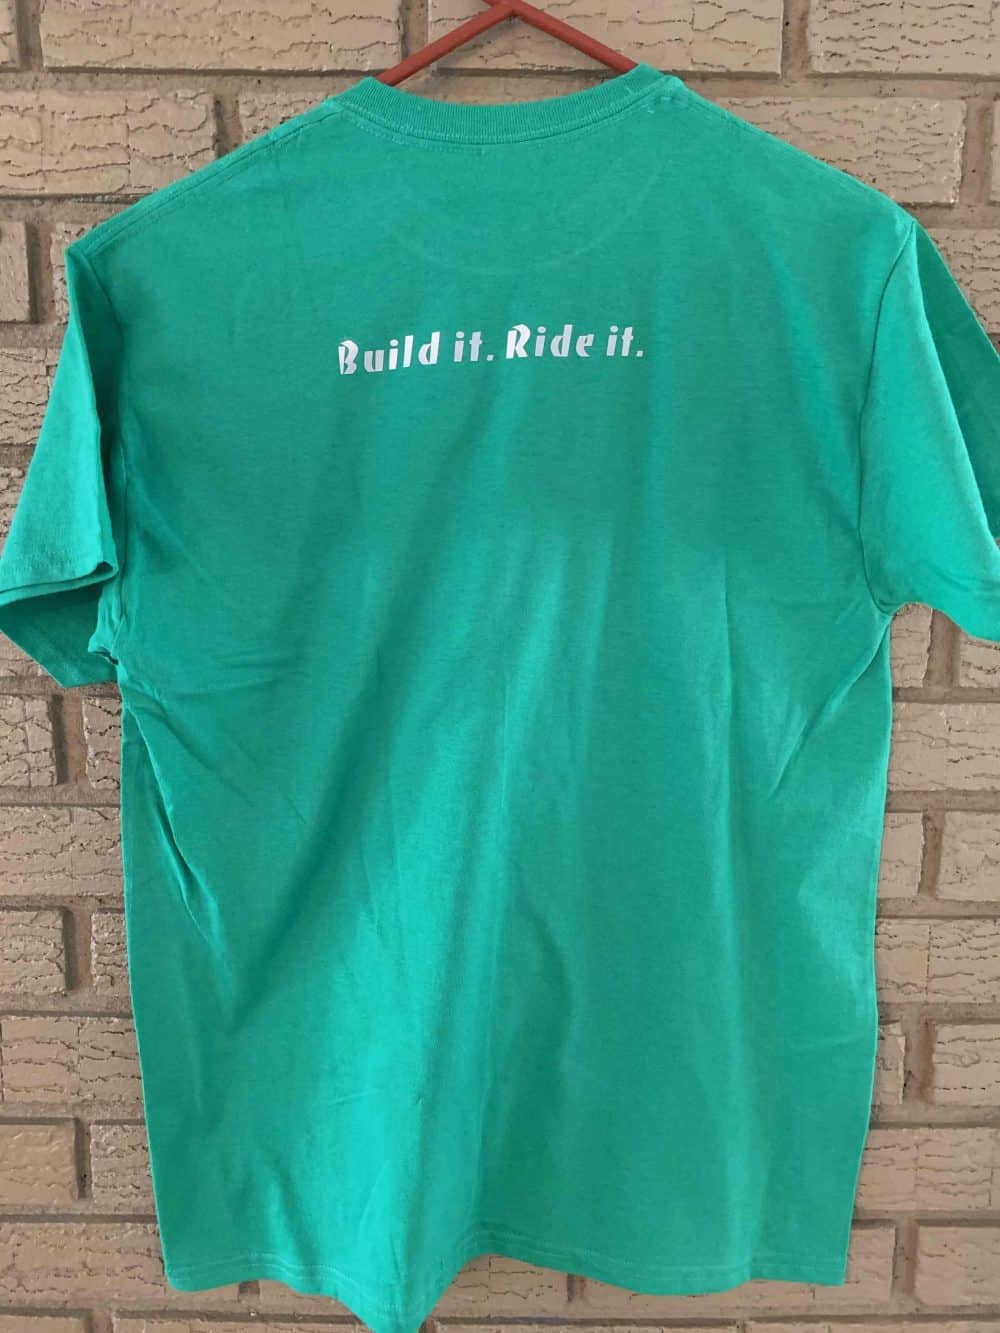 A green shirt that says " build is more. It."